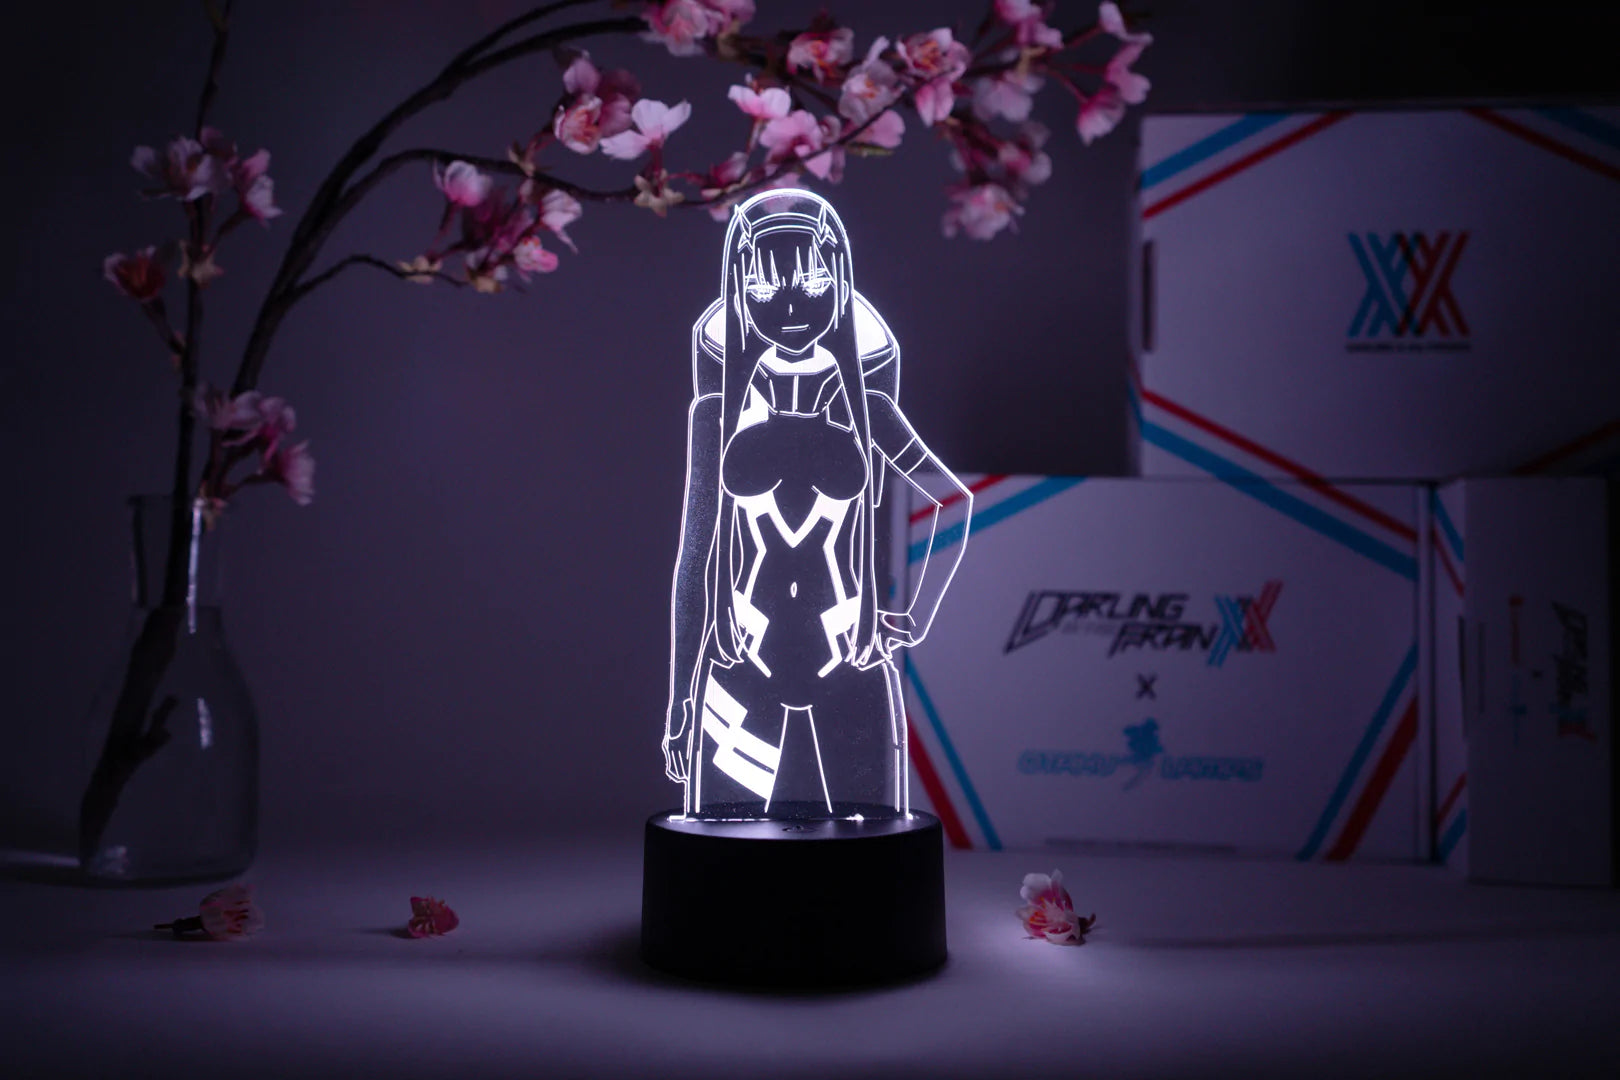 Darling in the Franxx - Zero Two Suit Otaku Lamp image count 7